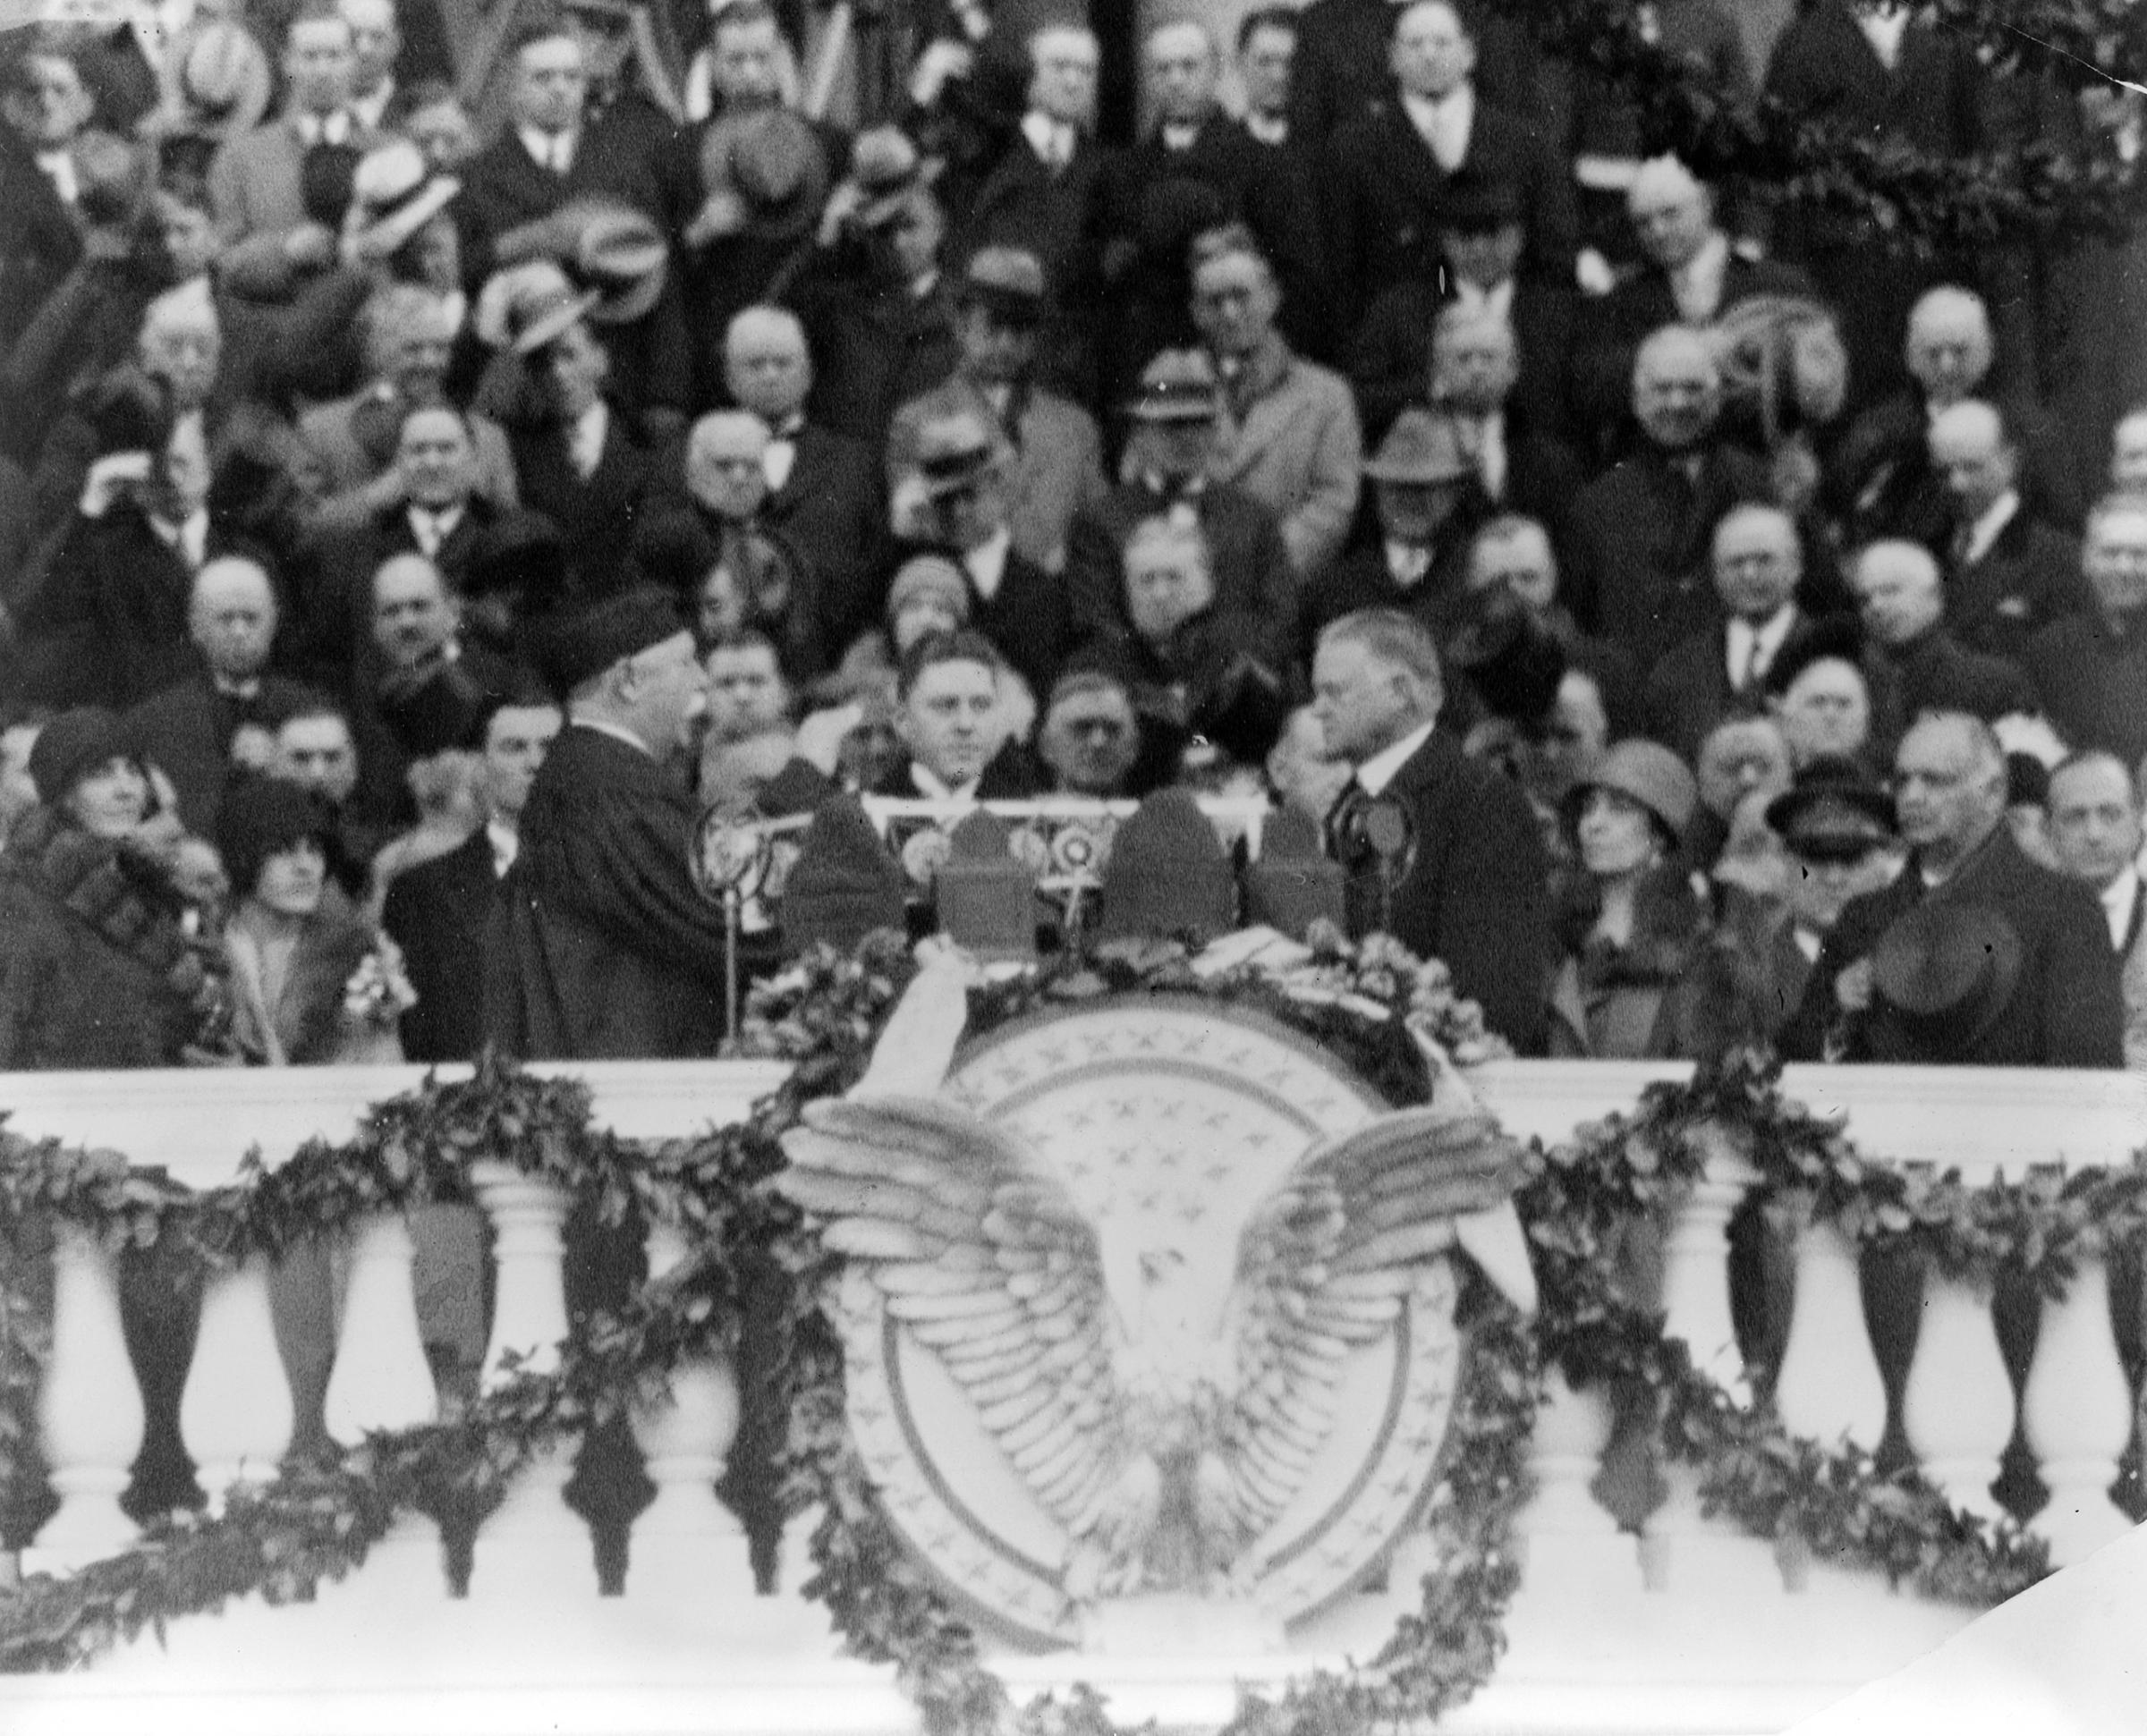 Chief Justice William H. Taft administering the oath of office to Herbert Hoover on the east portico of the U.S. Capitol, March 4, 1929.